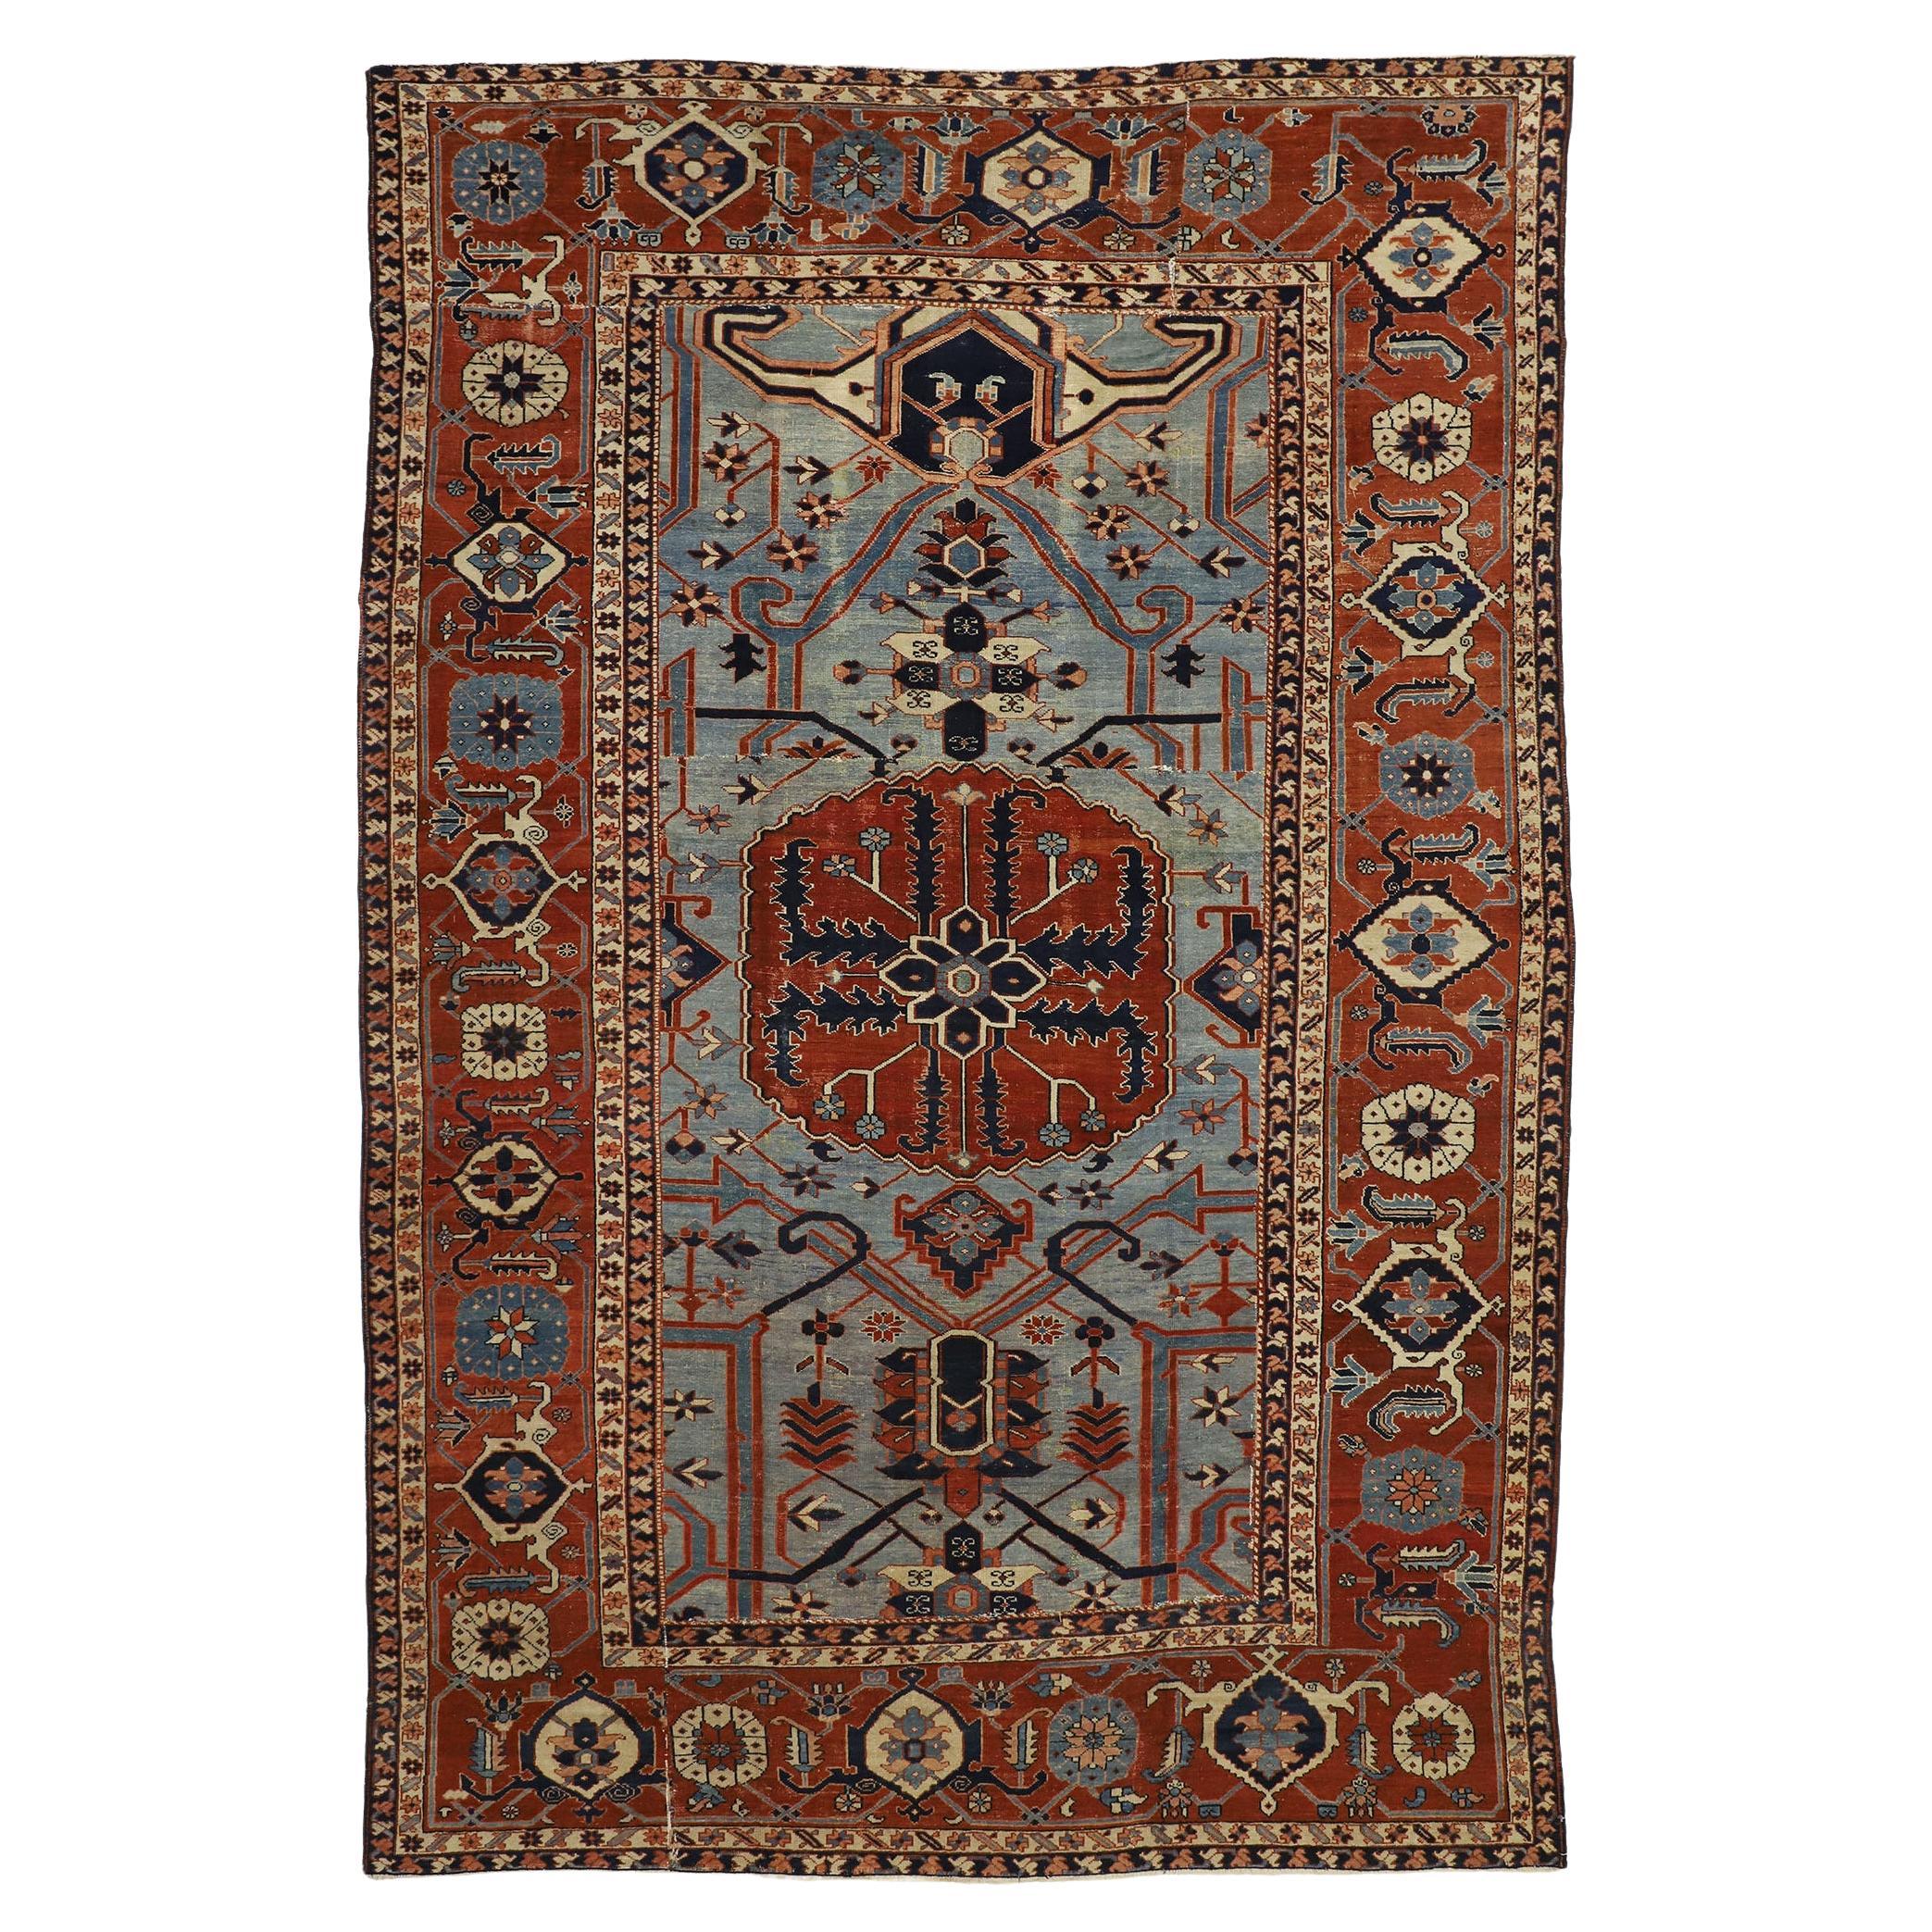 Antique Persian Serapi Rug, Ivy League Style Meets Nomadic Charm